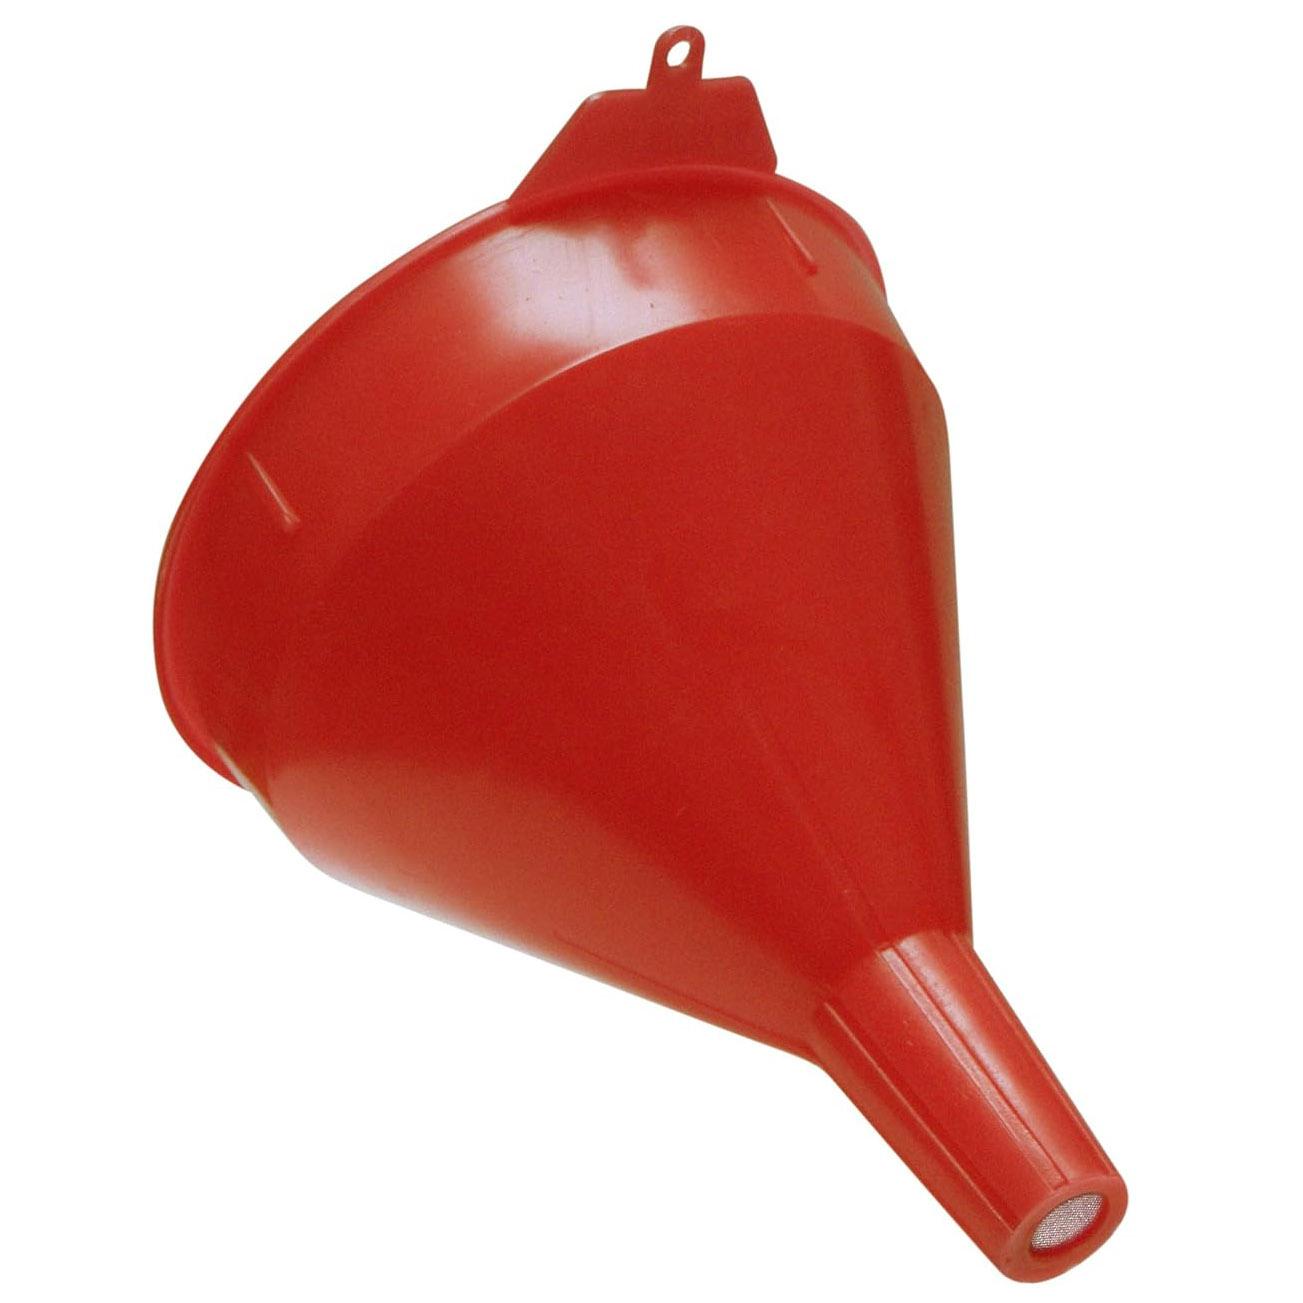 WirthCo 32002 Funnel King Red Safety Funnel for Oil Fuel Gas for $2.45